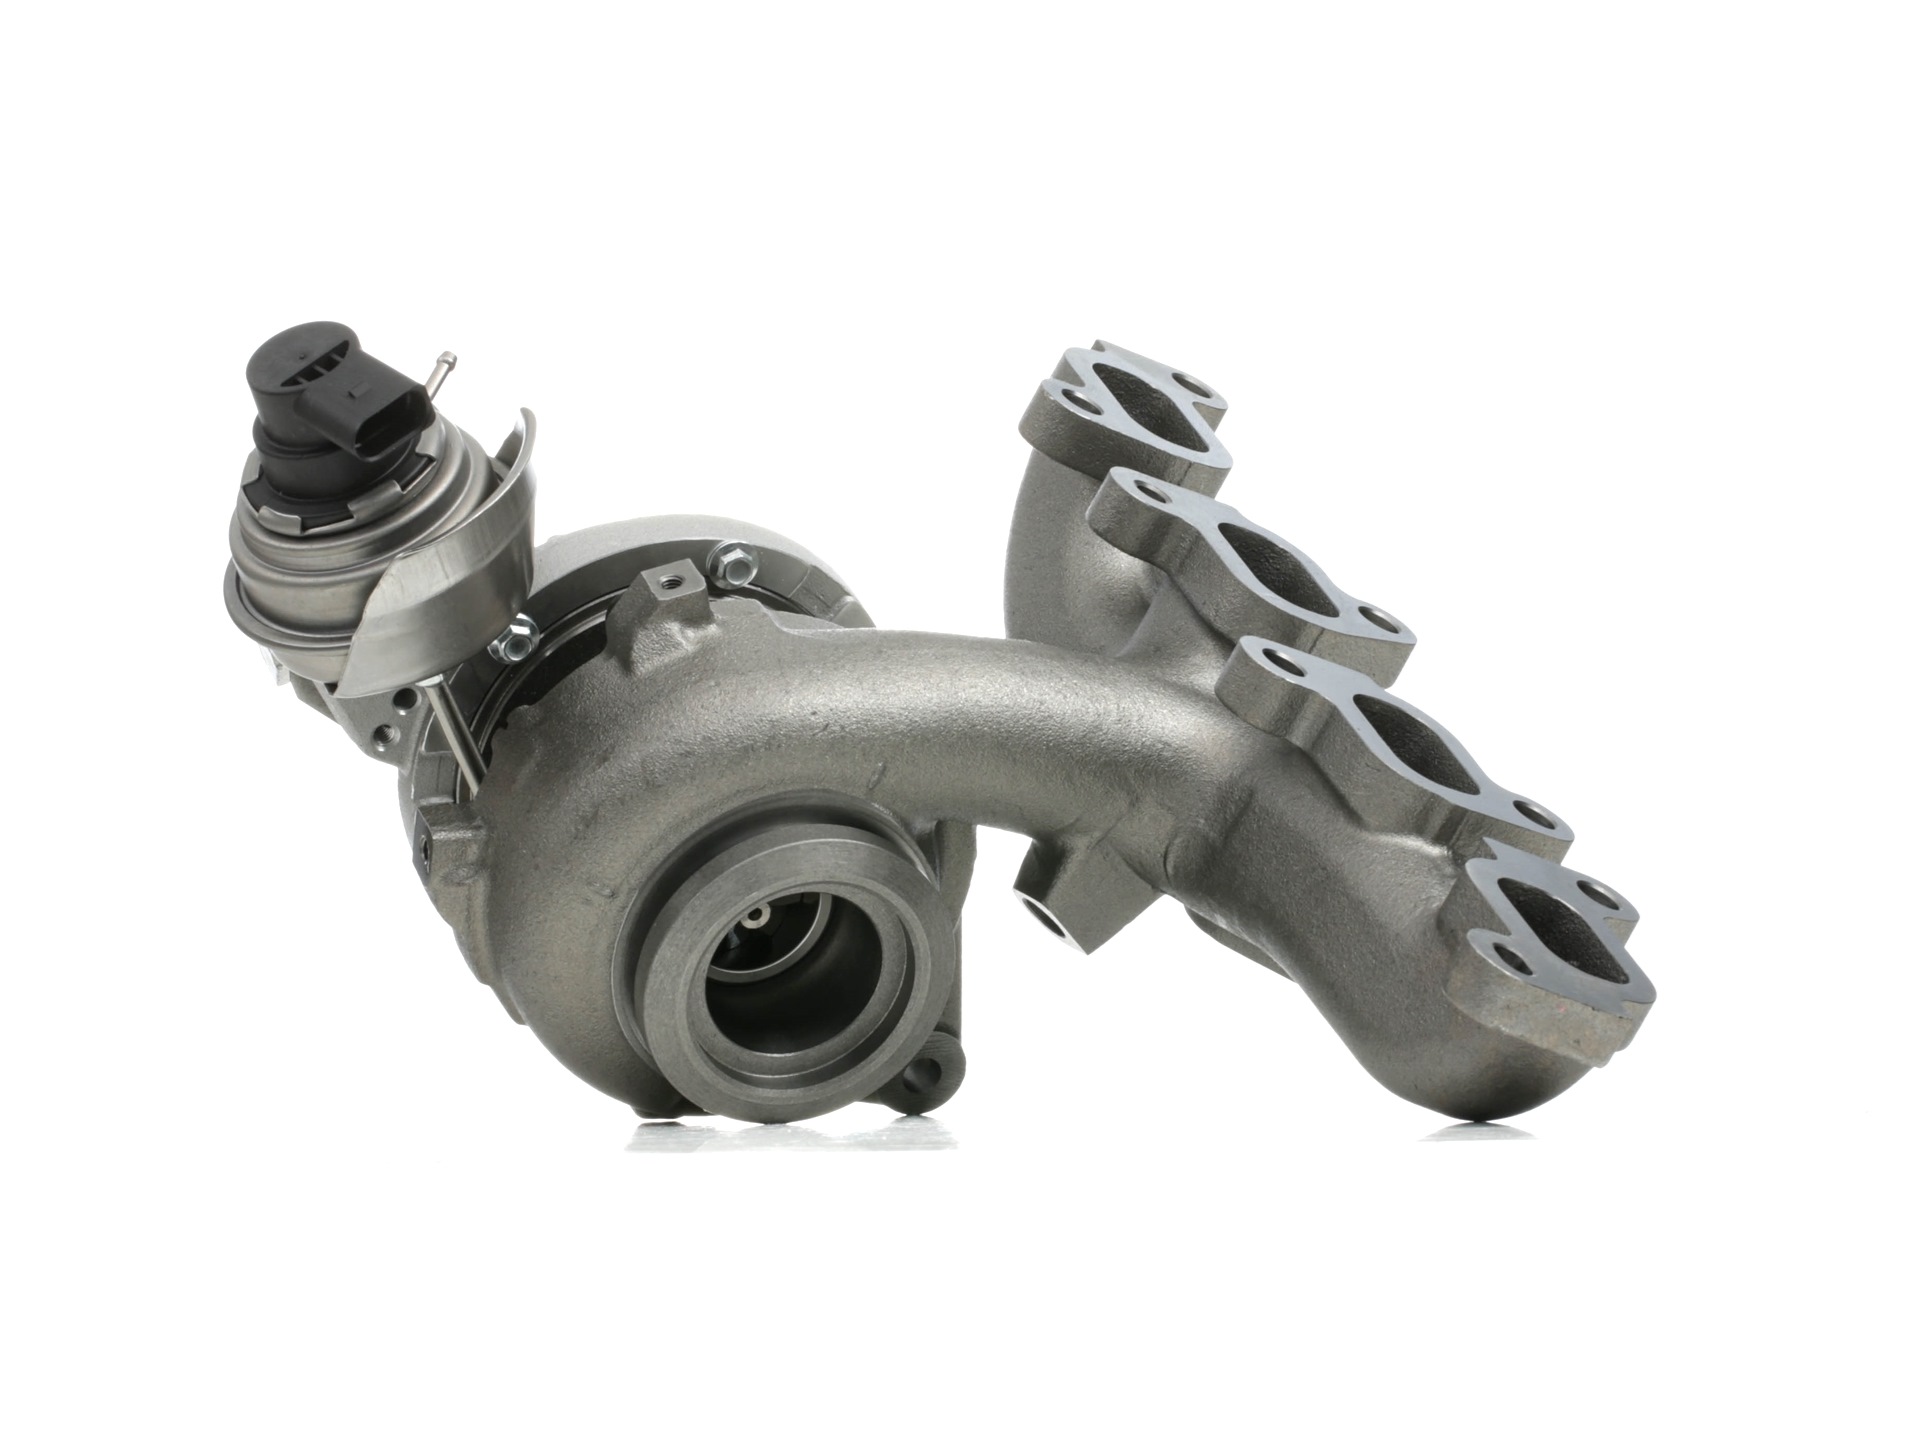 STARK SKCT-1190050 Turbocharger Exhaust Turbocharger, without gaskets/seals